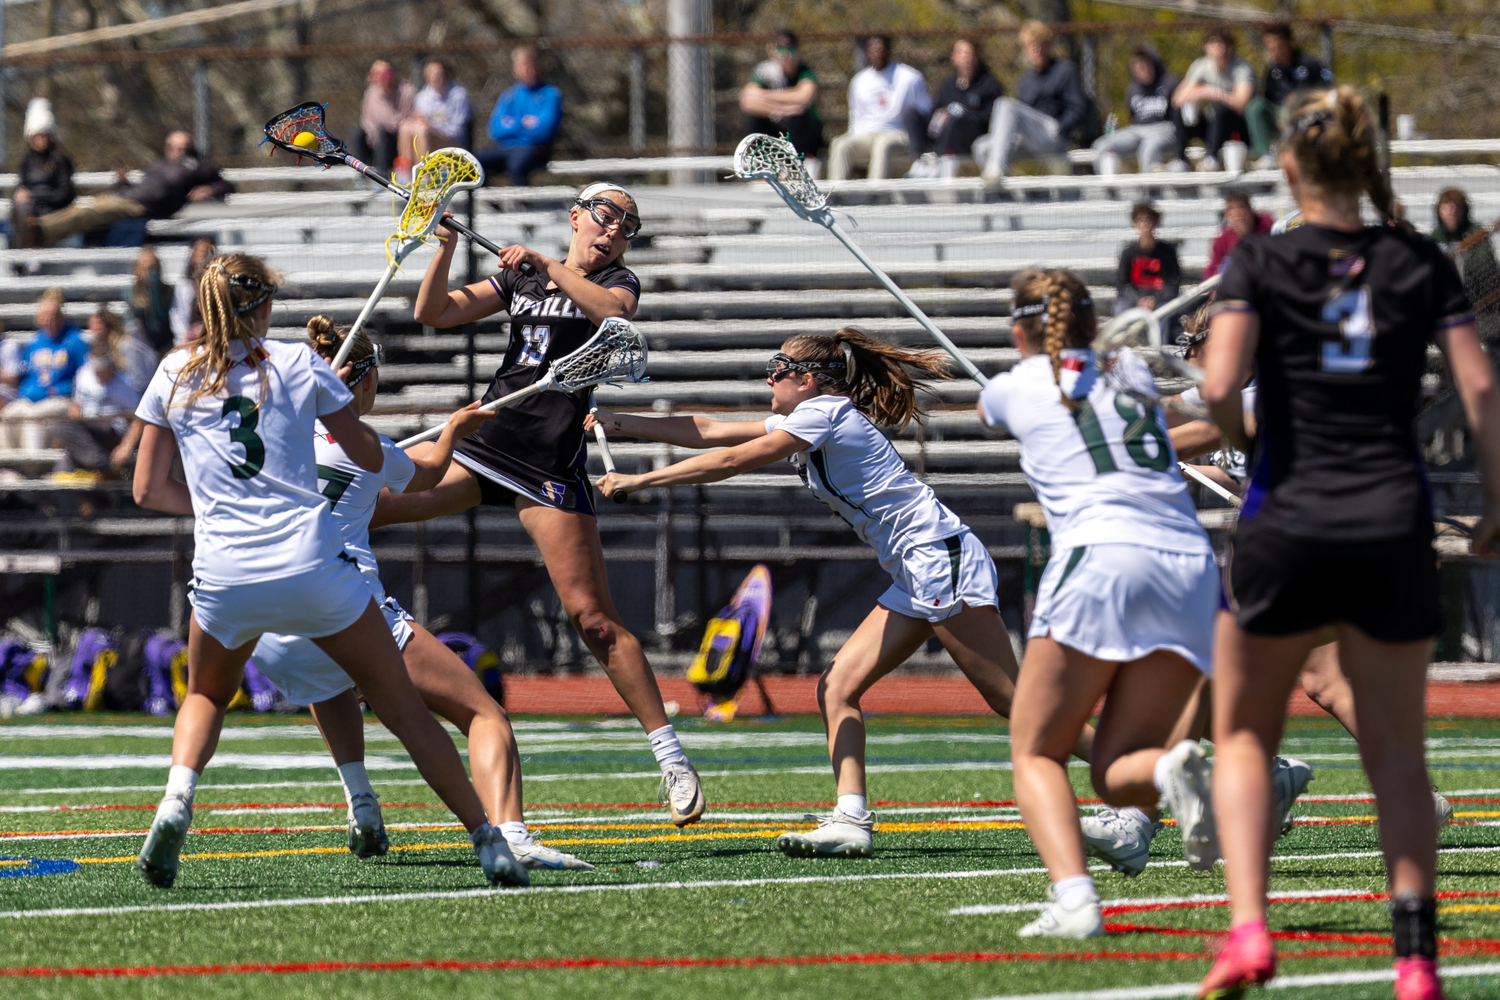 Westhampton Beach players swarm to defend against Sayville during a 9-5 loss on April 26. RON ESPOSITO